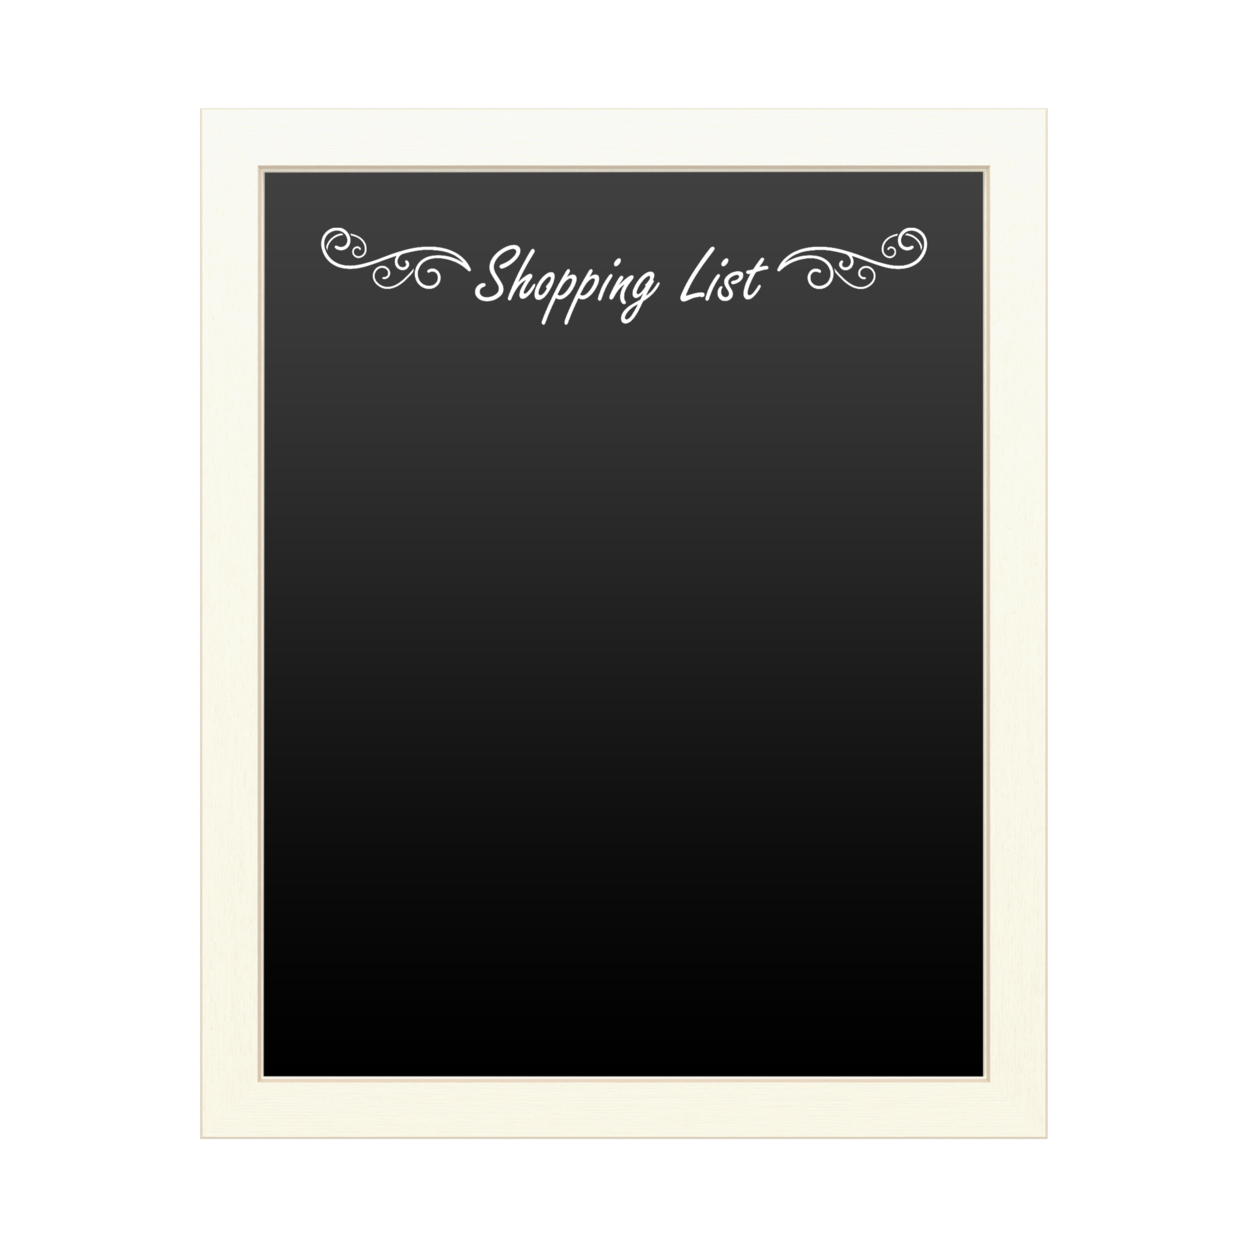 16 X 20 Chalk Board With Printed Artwork - Shopping List White Board - Ready To Hang Chalkboard